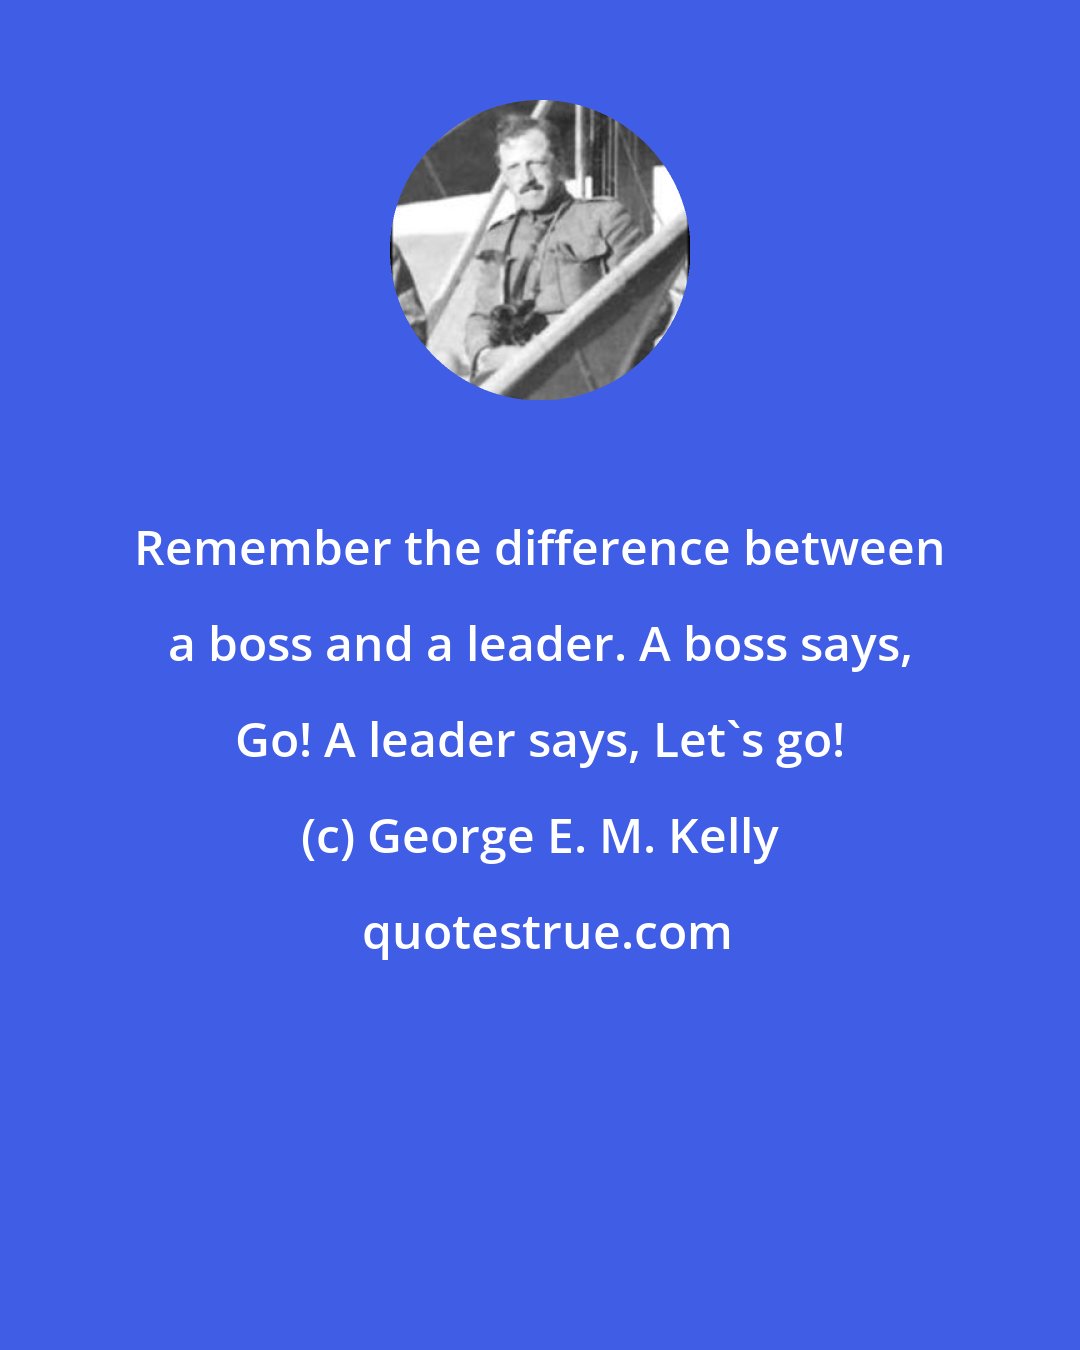 George E. M. Kelly: Remember the difference between a boss and a leader. A boss says, Go! A leader says, Let's go!